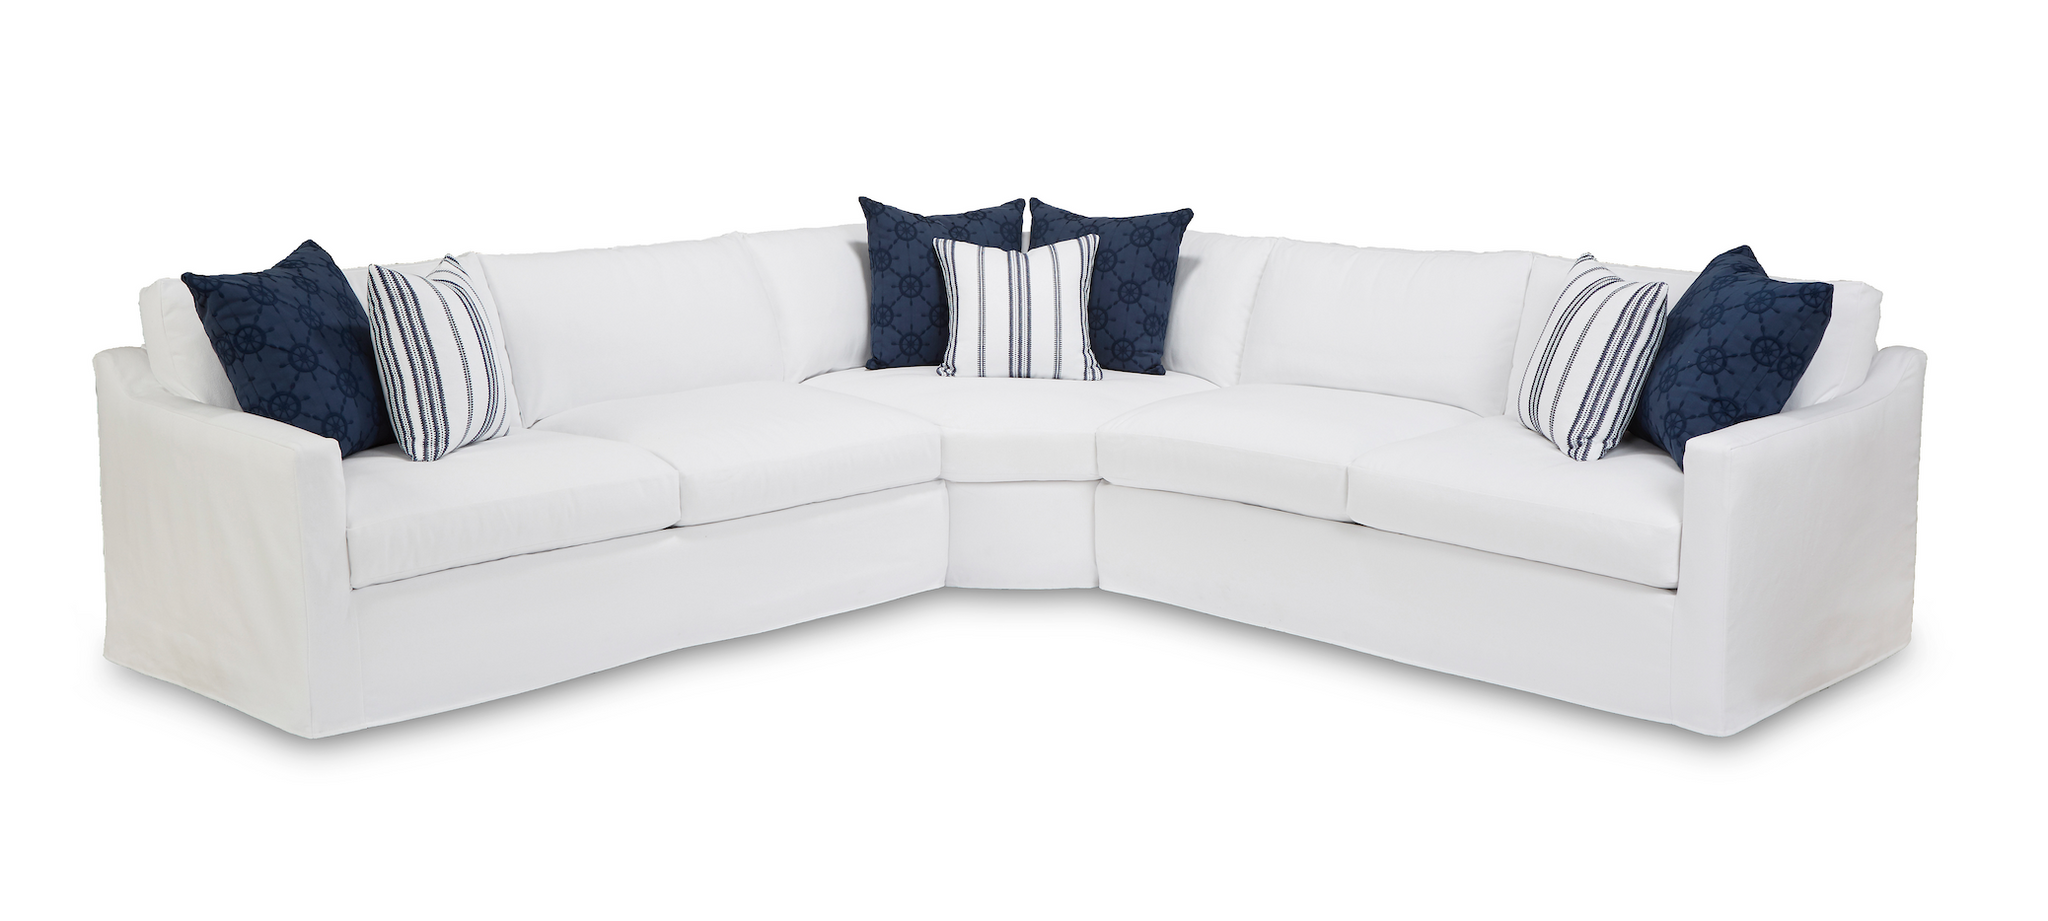 Four Seasons Reese Sectional